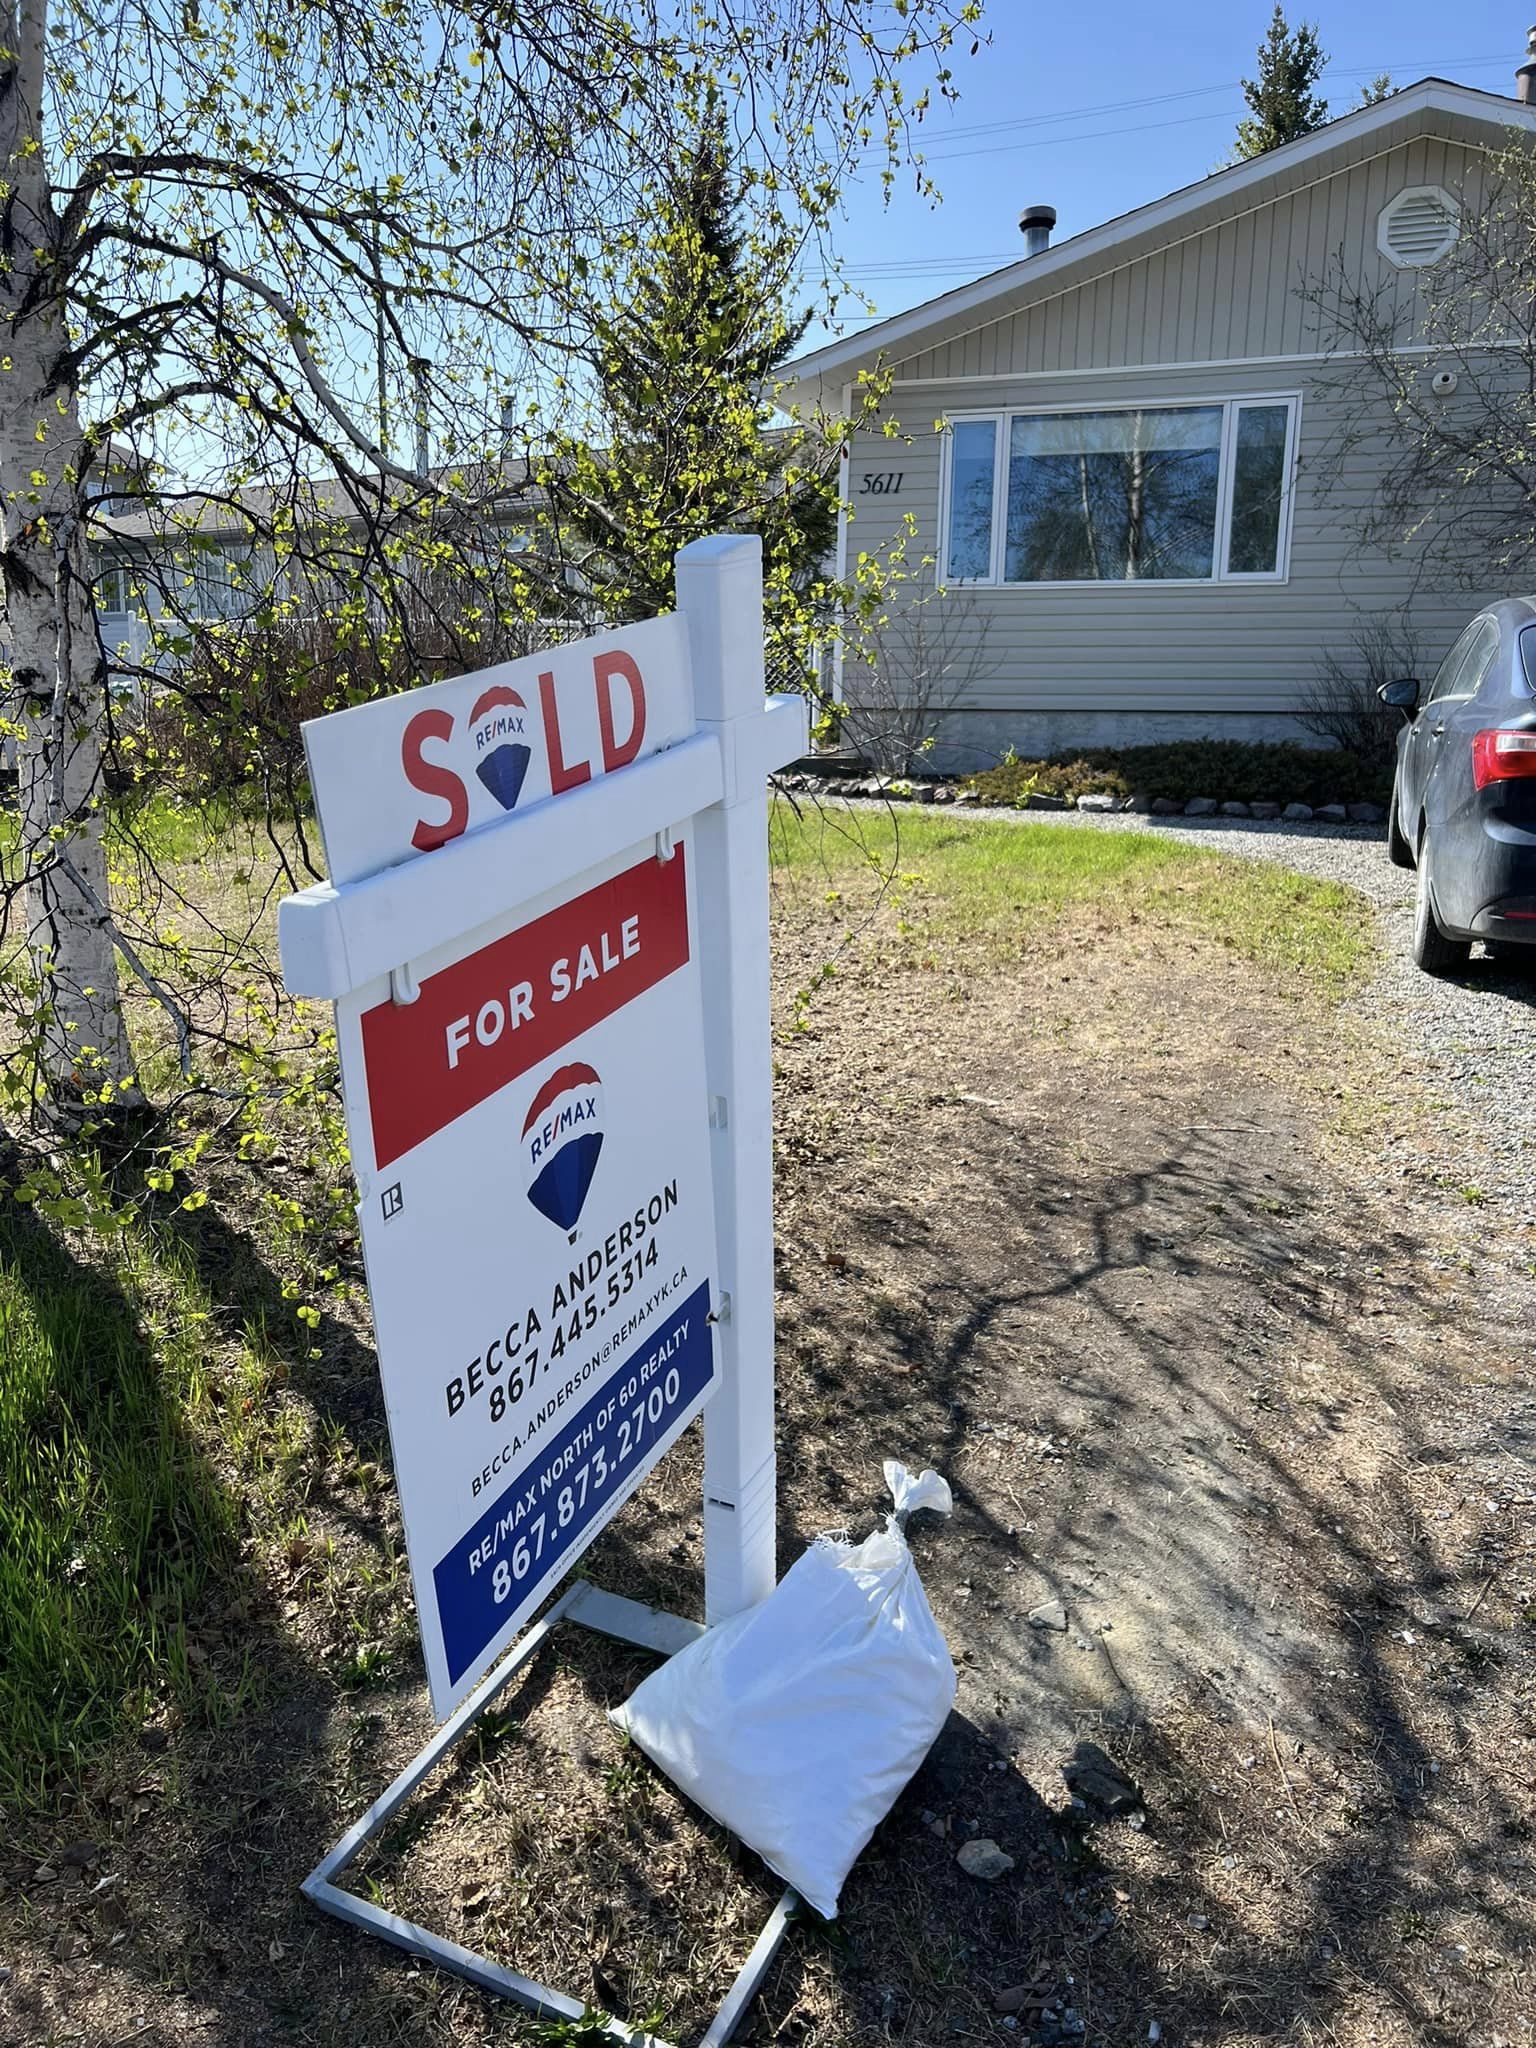 RE/MAX North of 60 Realty 341 A Old Airport Rd, Yellowknife Northwest Territories X1A 3T4